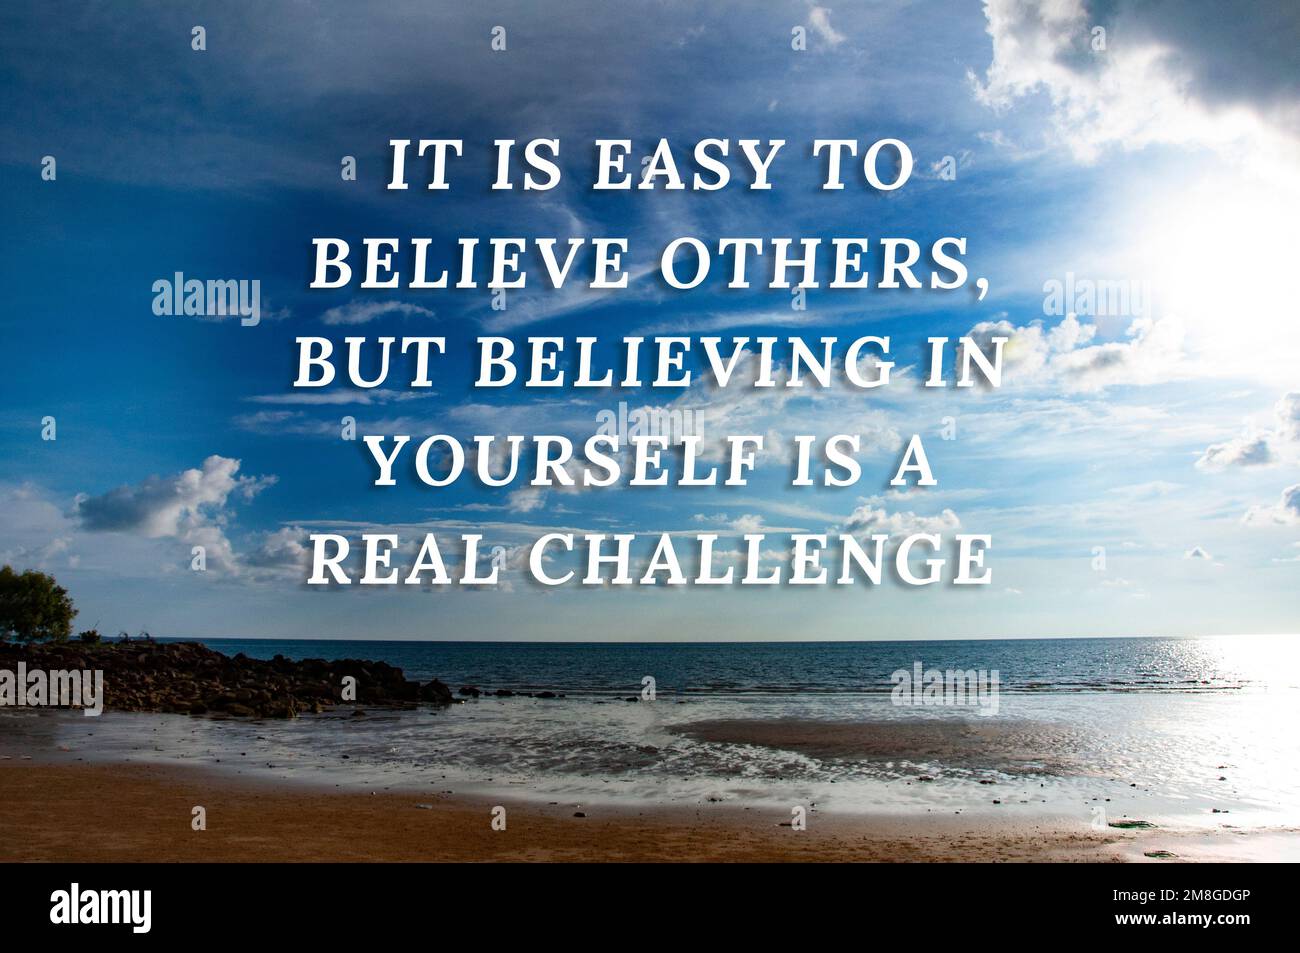 Motivational quotes text - It is easy to believe others, but believing in yourself is a real challenge. With beautiful beach background. Motivational Stock Photo